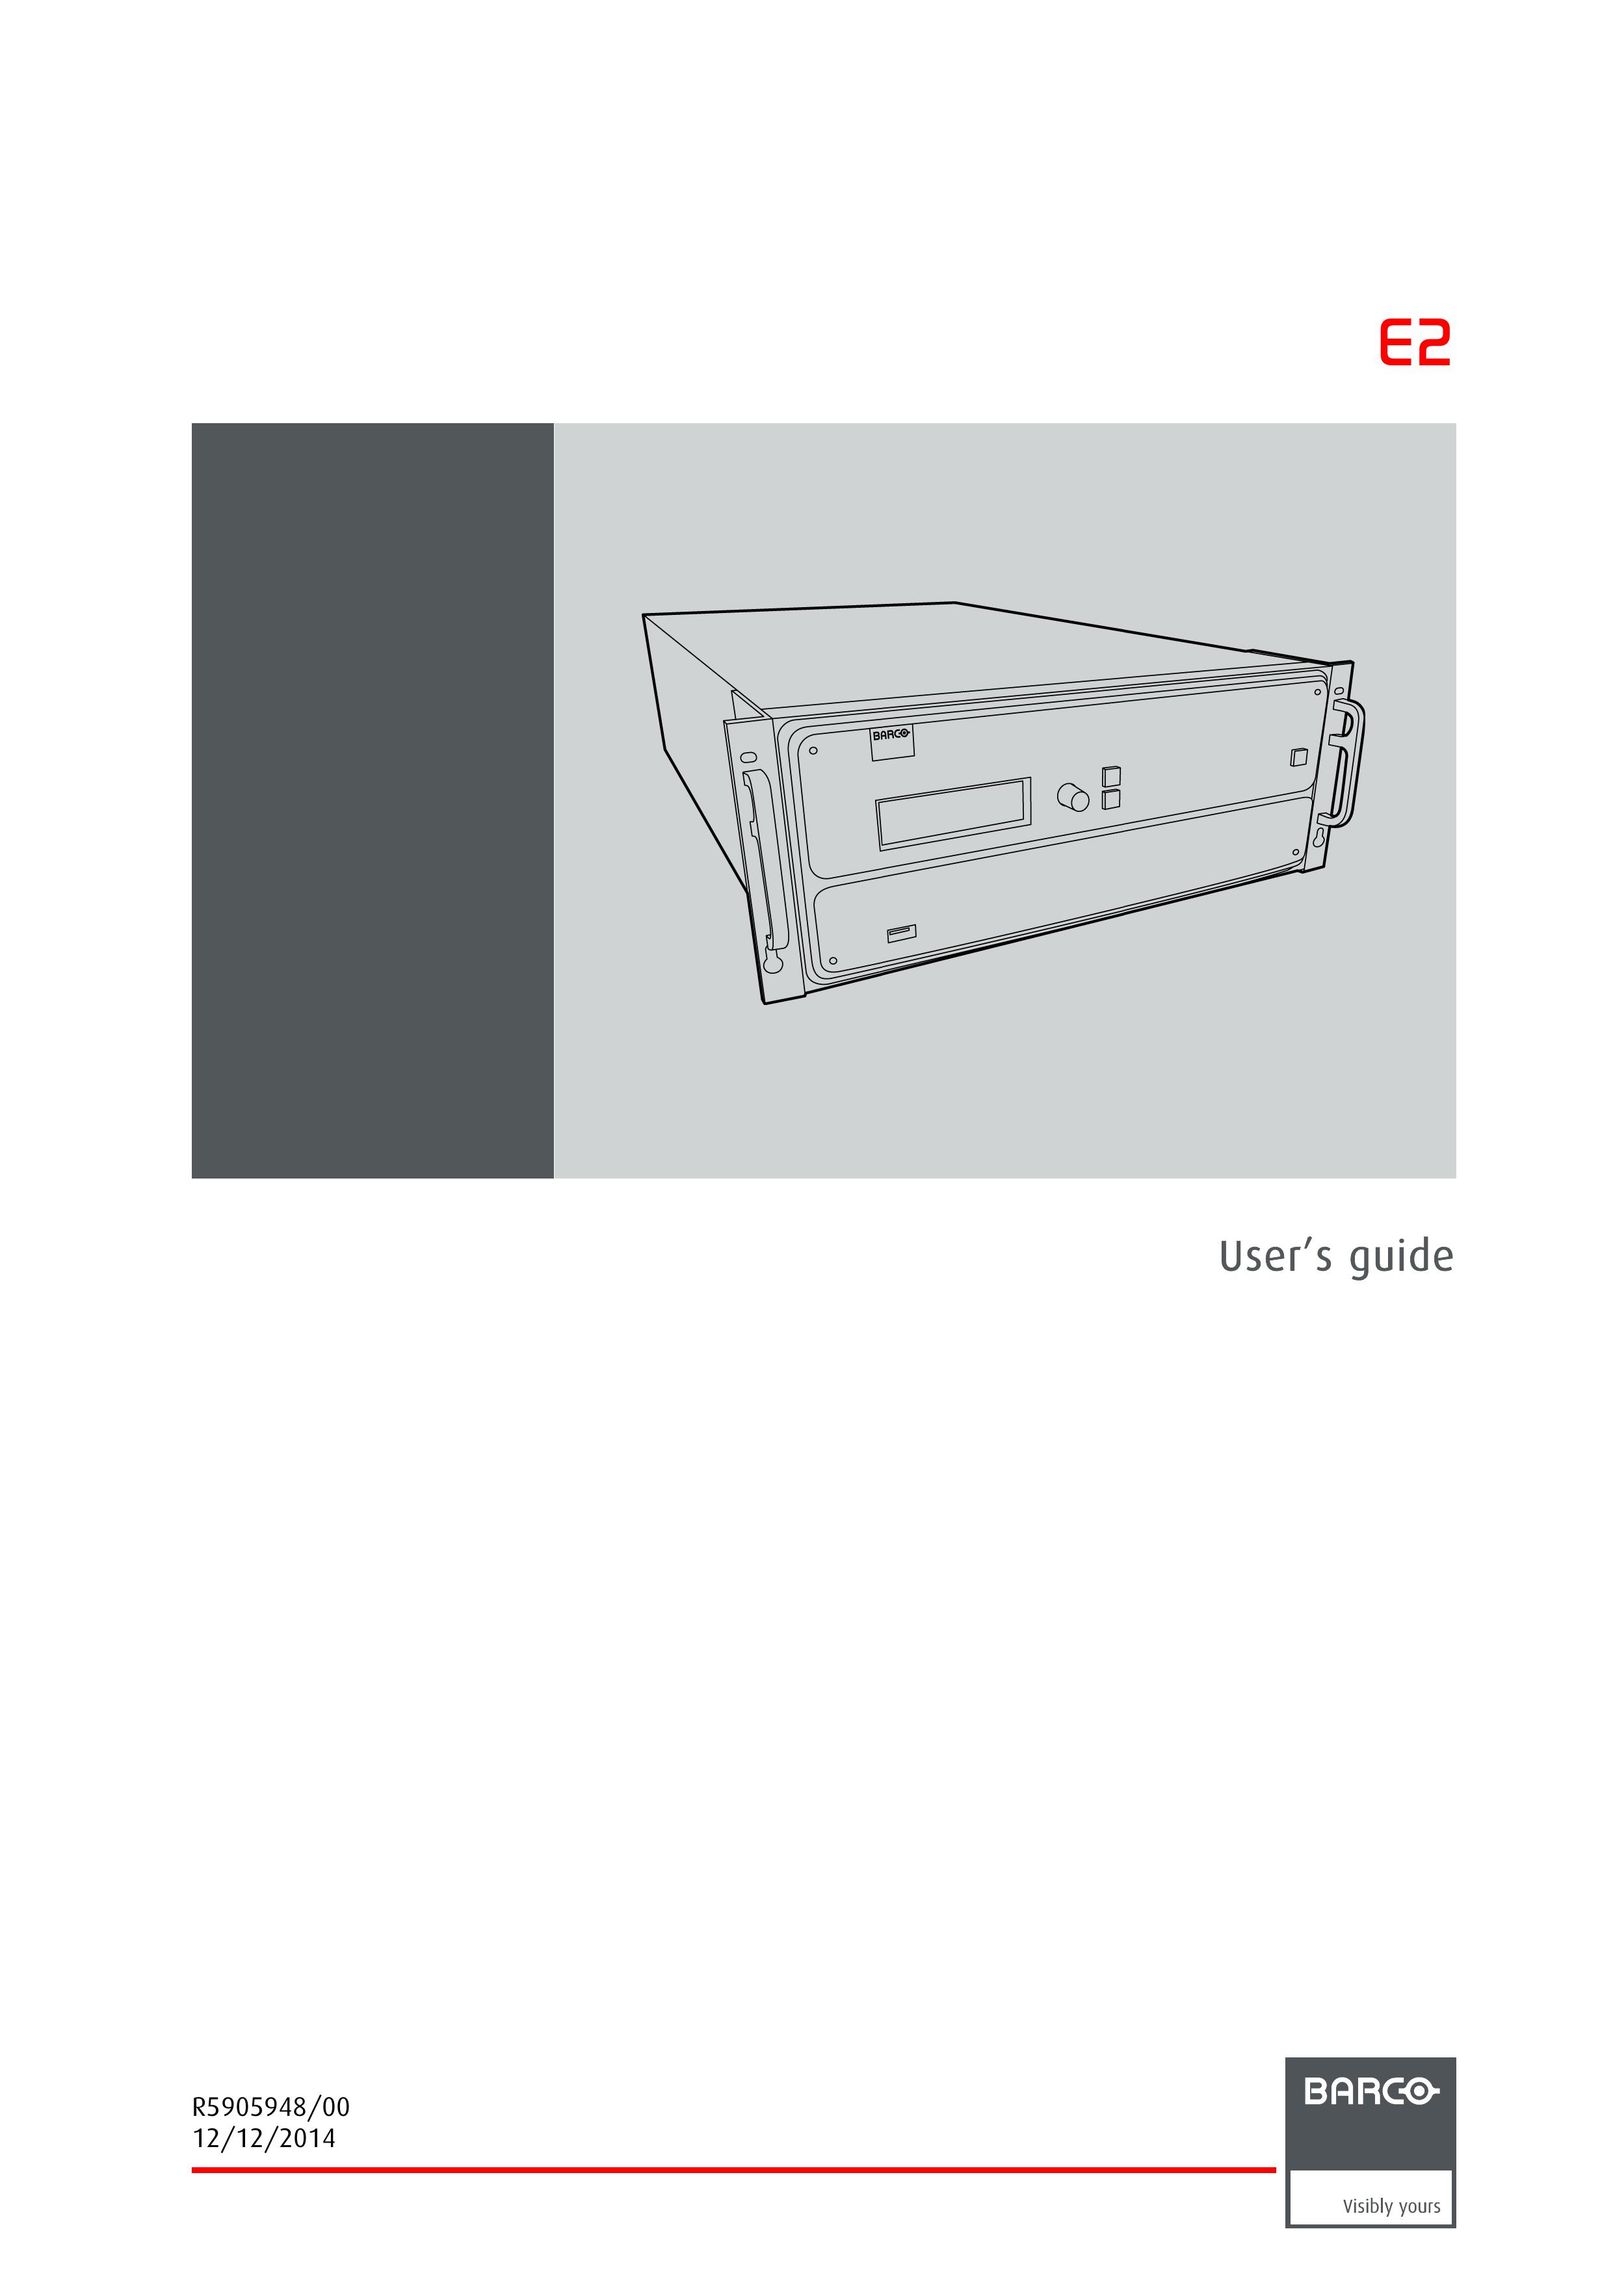 Barco RS905948/00 Pet Care Product User Manual